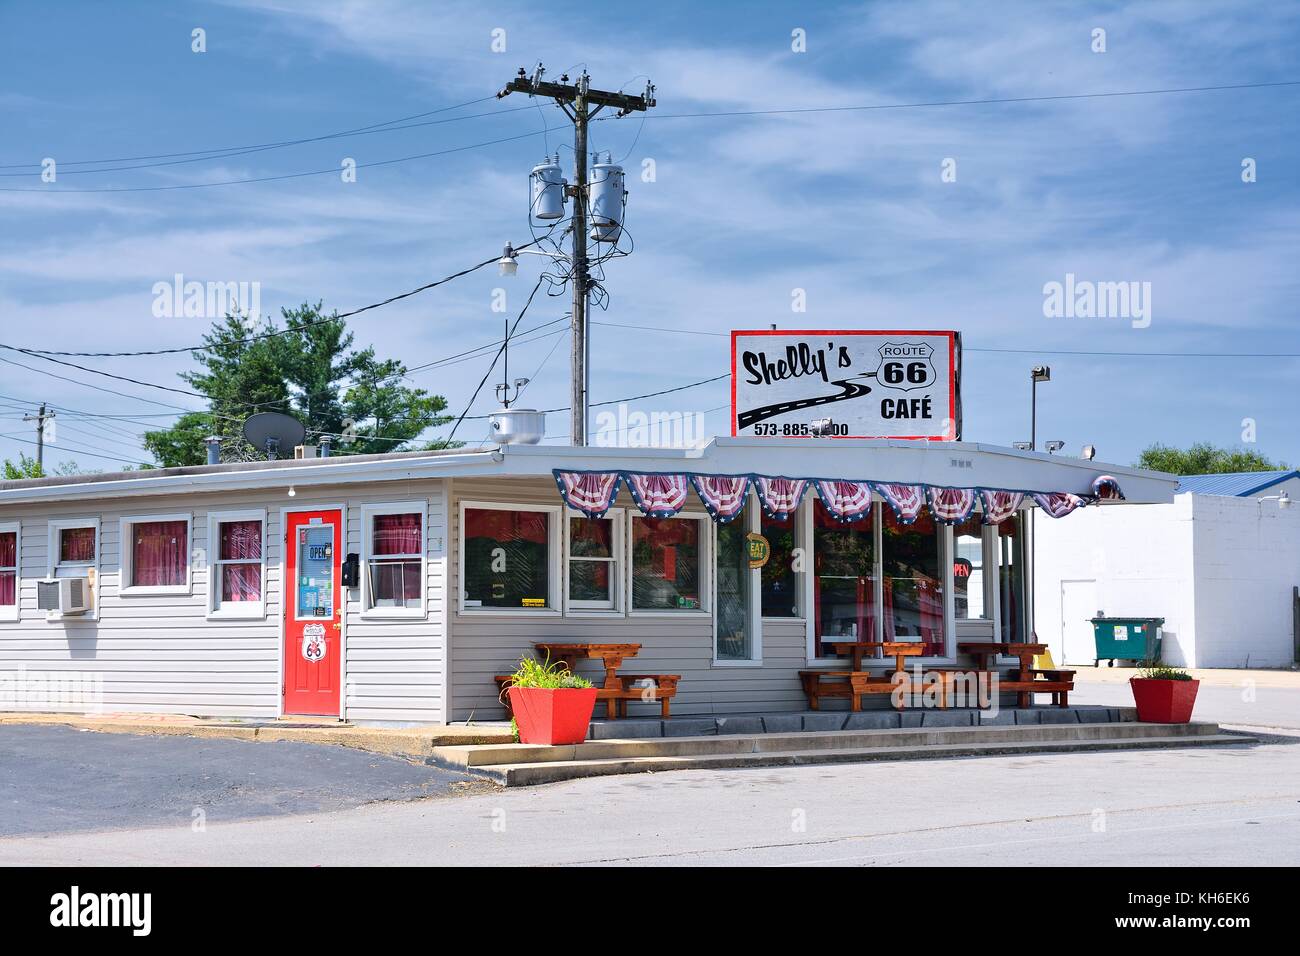 Cuba, Missouri, USA - July 18, 2017 : Shellys Route 66 Cafe in Cuba, located on historic Route 66. Stock Photo